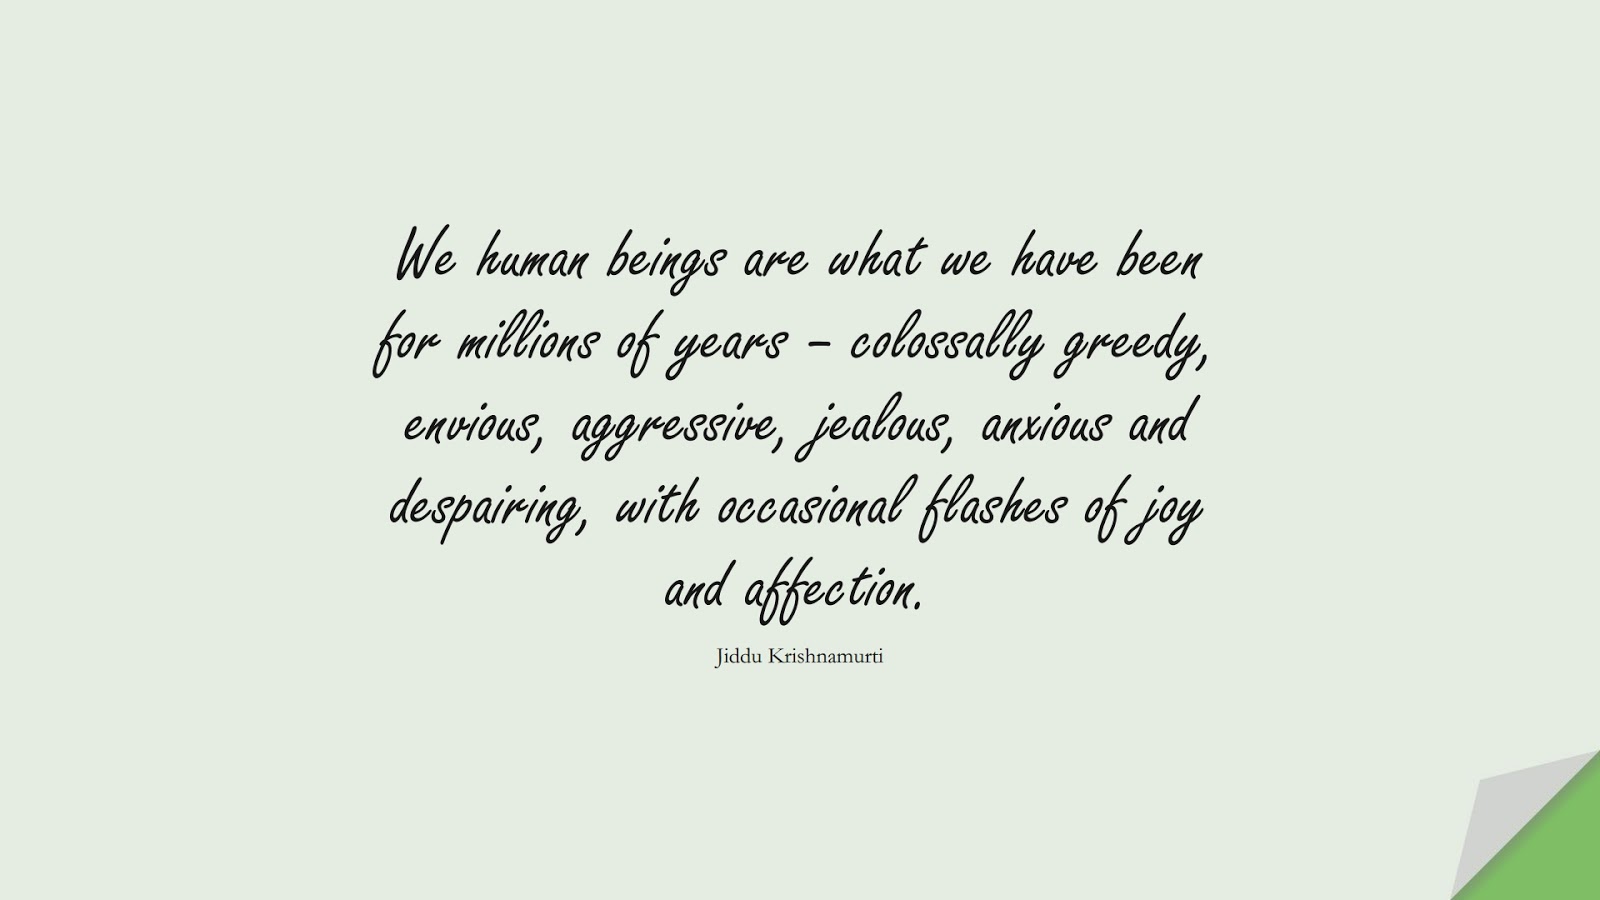 We human beings are what we have been for millions of years – colossally greedy, envious, aggressive, jealous, anxious and despairing, with occasional flashes of joy and affection. (Jiddu Krishnamurti);  #StressQuotes